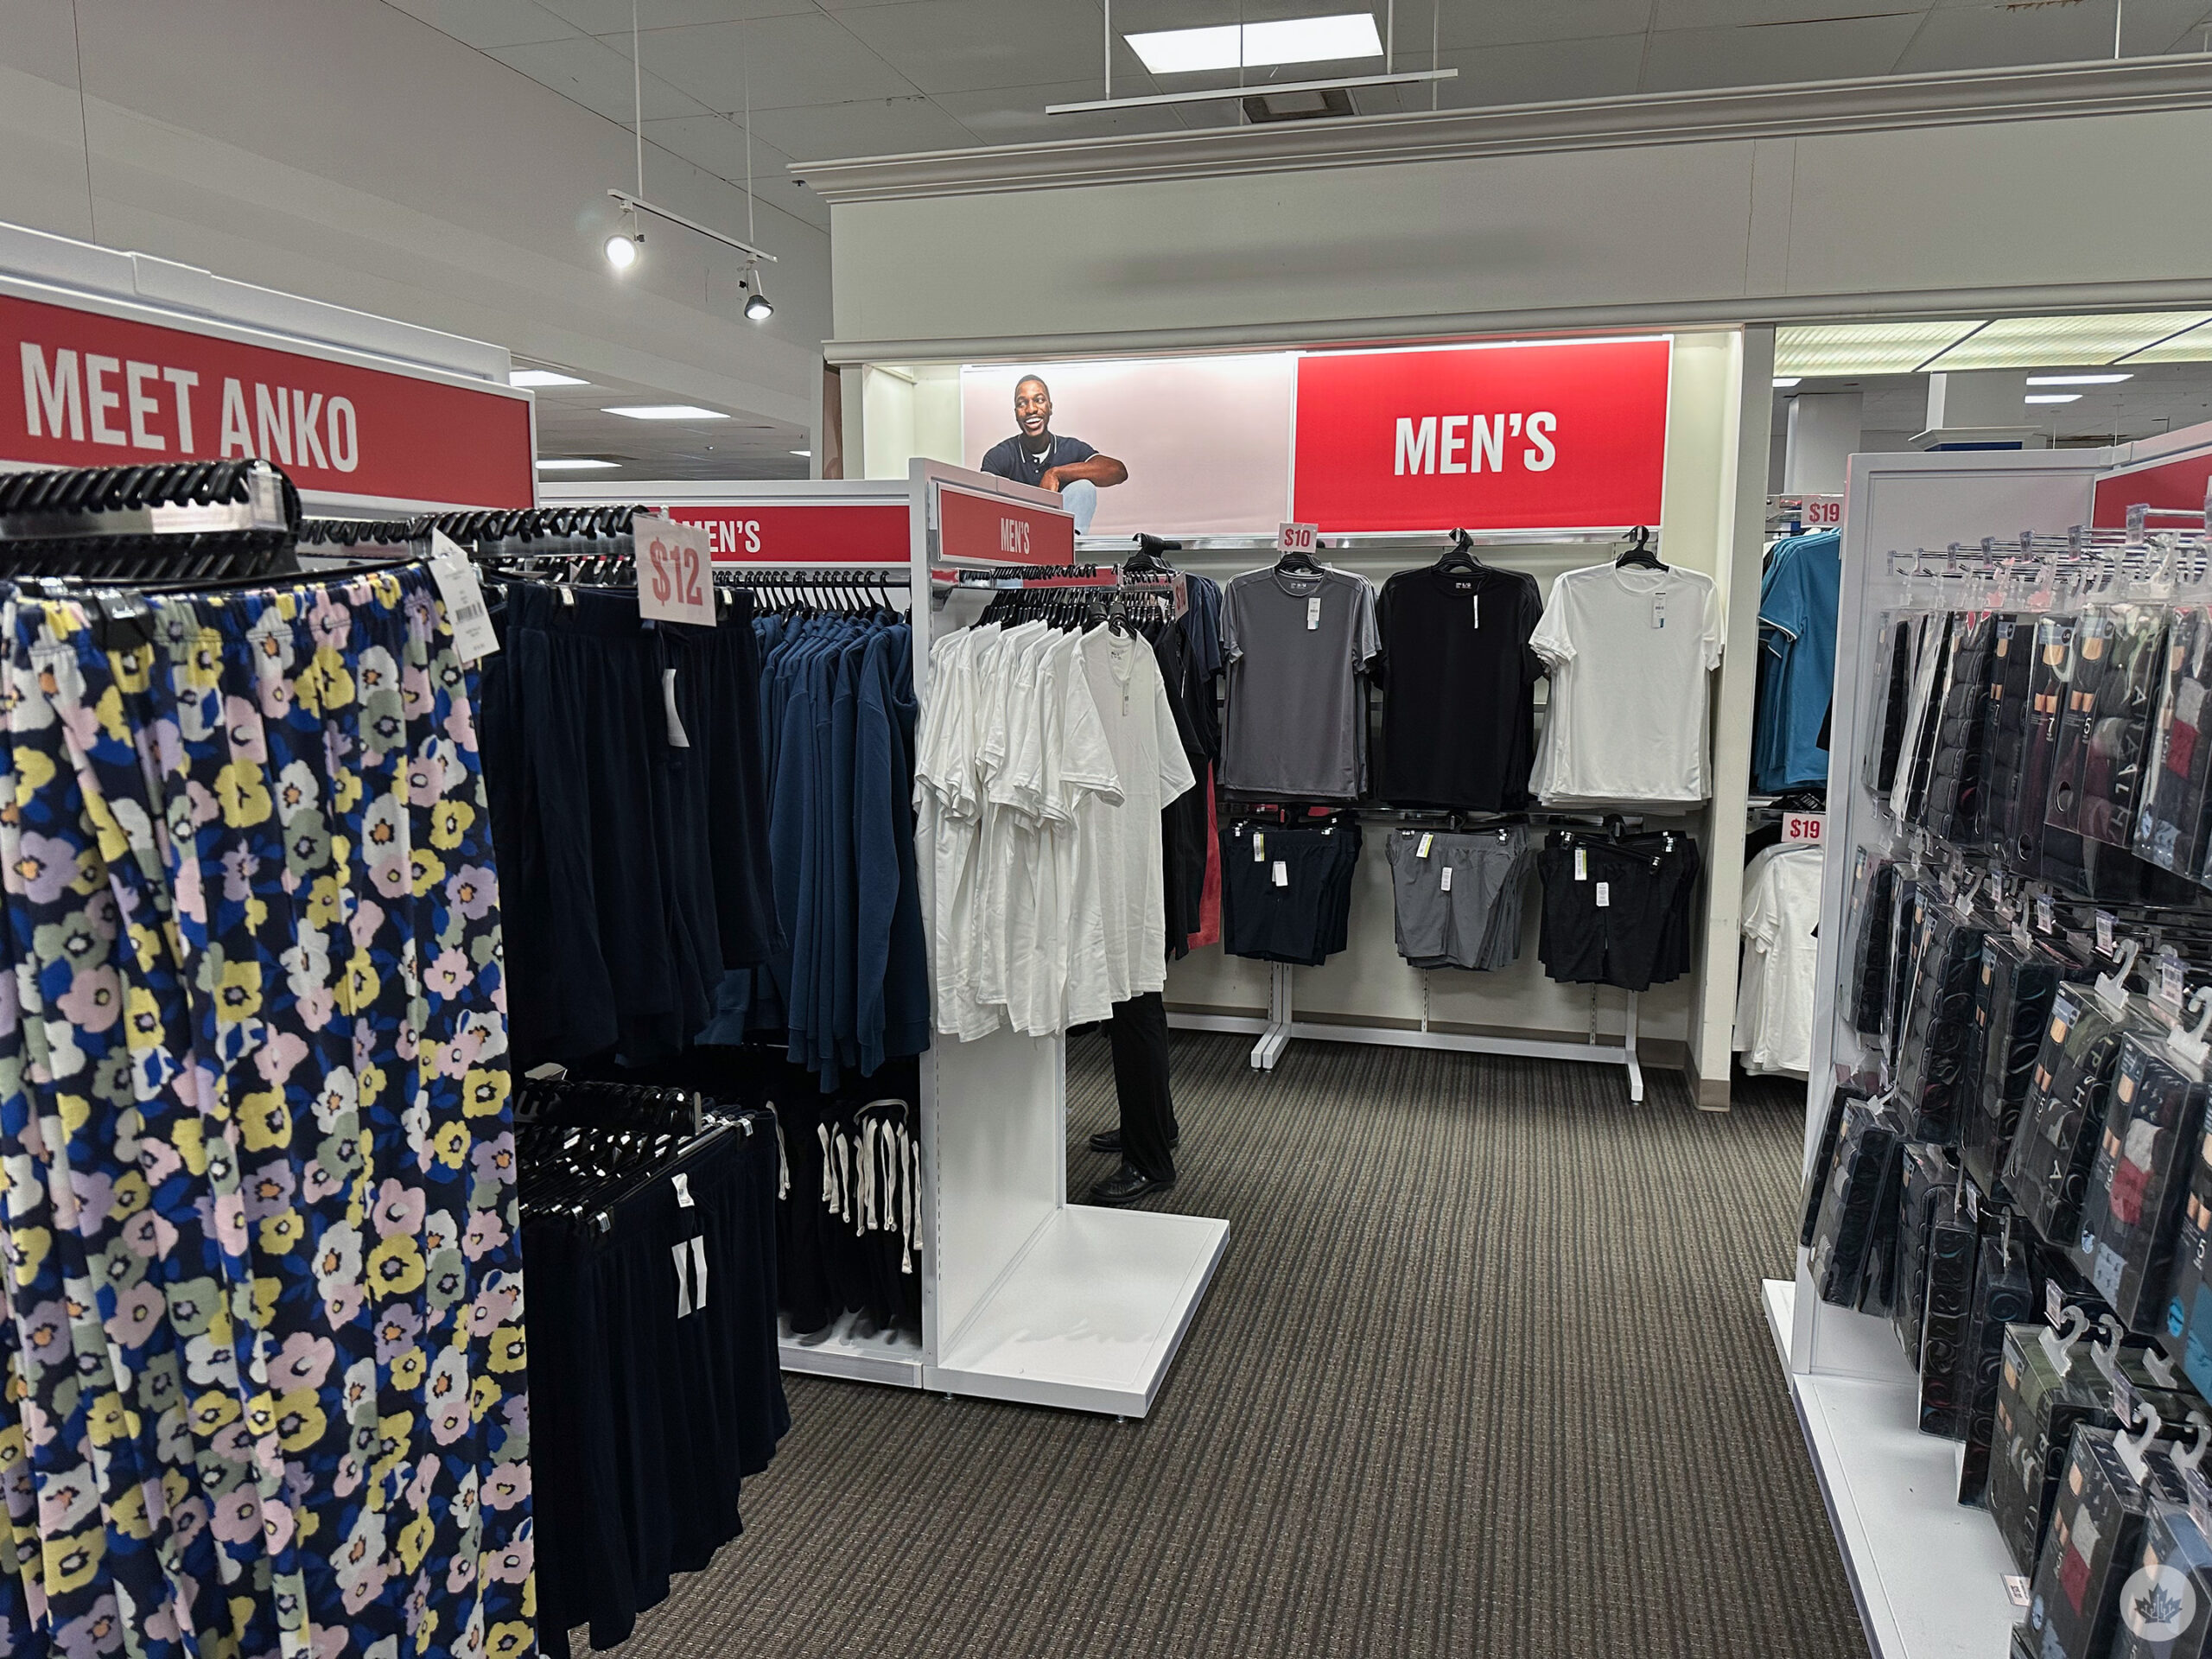 zellers is back and surprisingly doesn’t totally suck